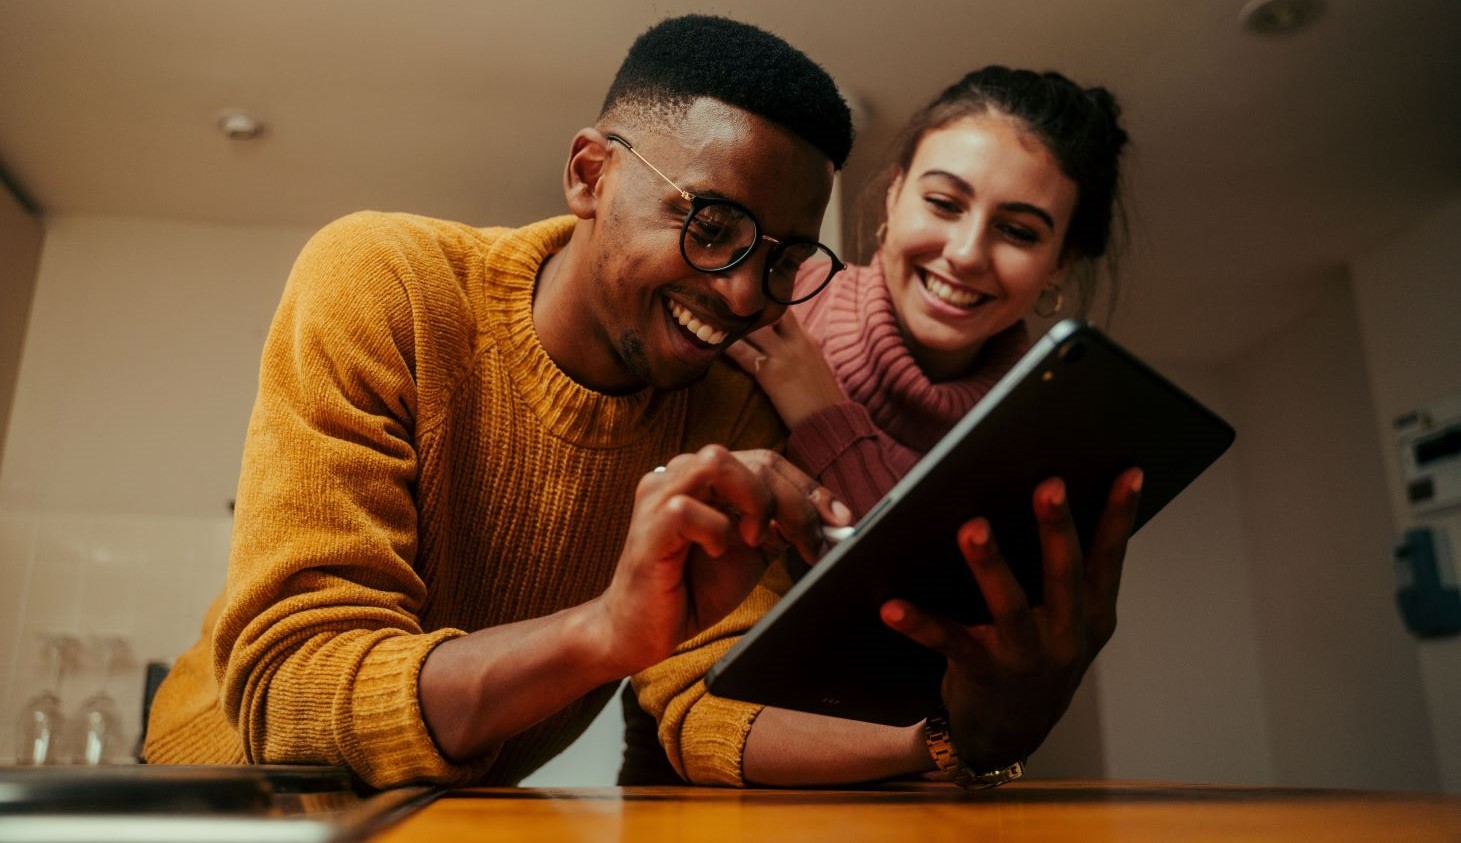 Two people smiling while using an ipad